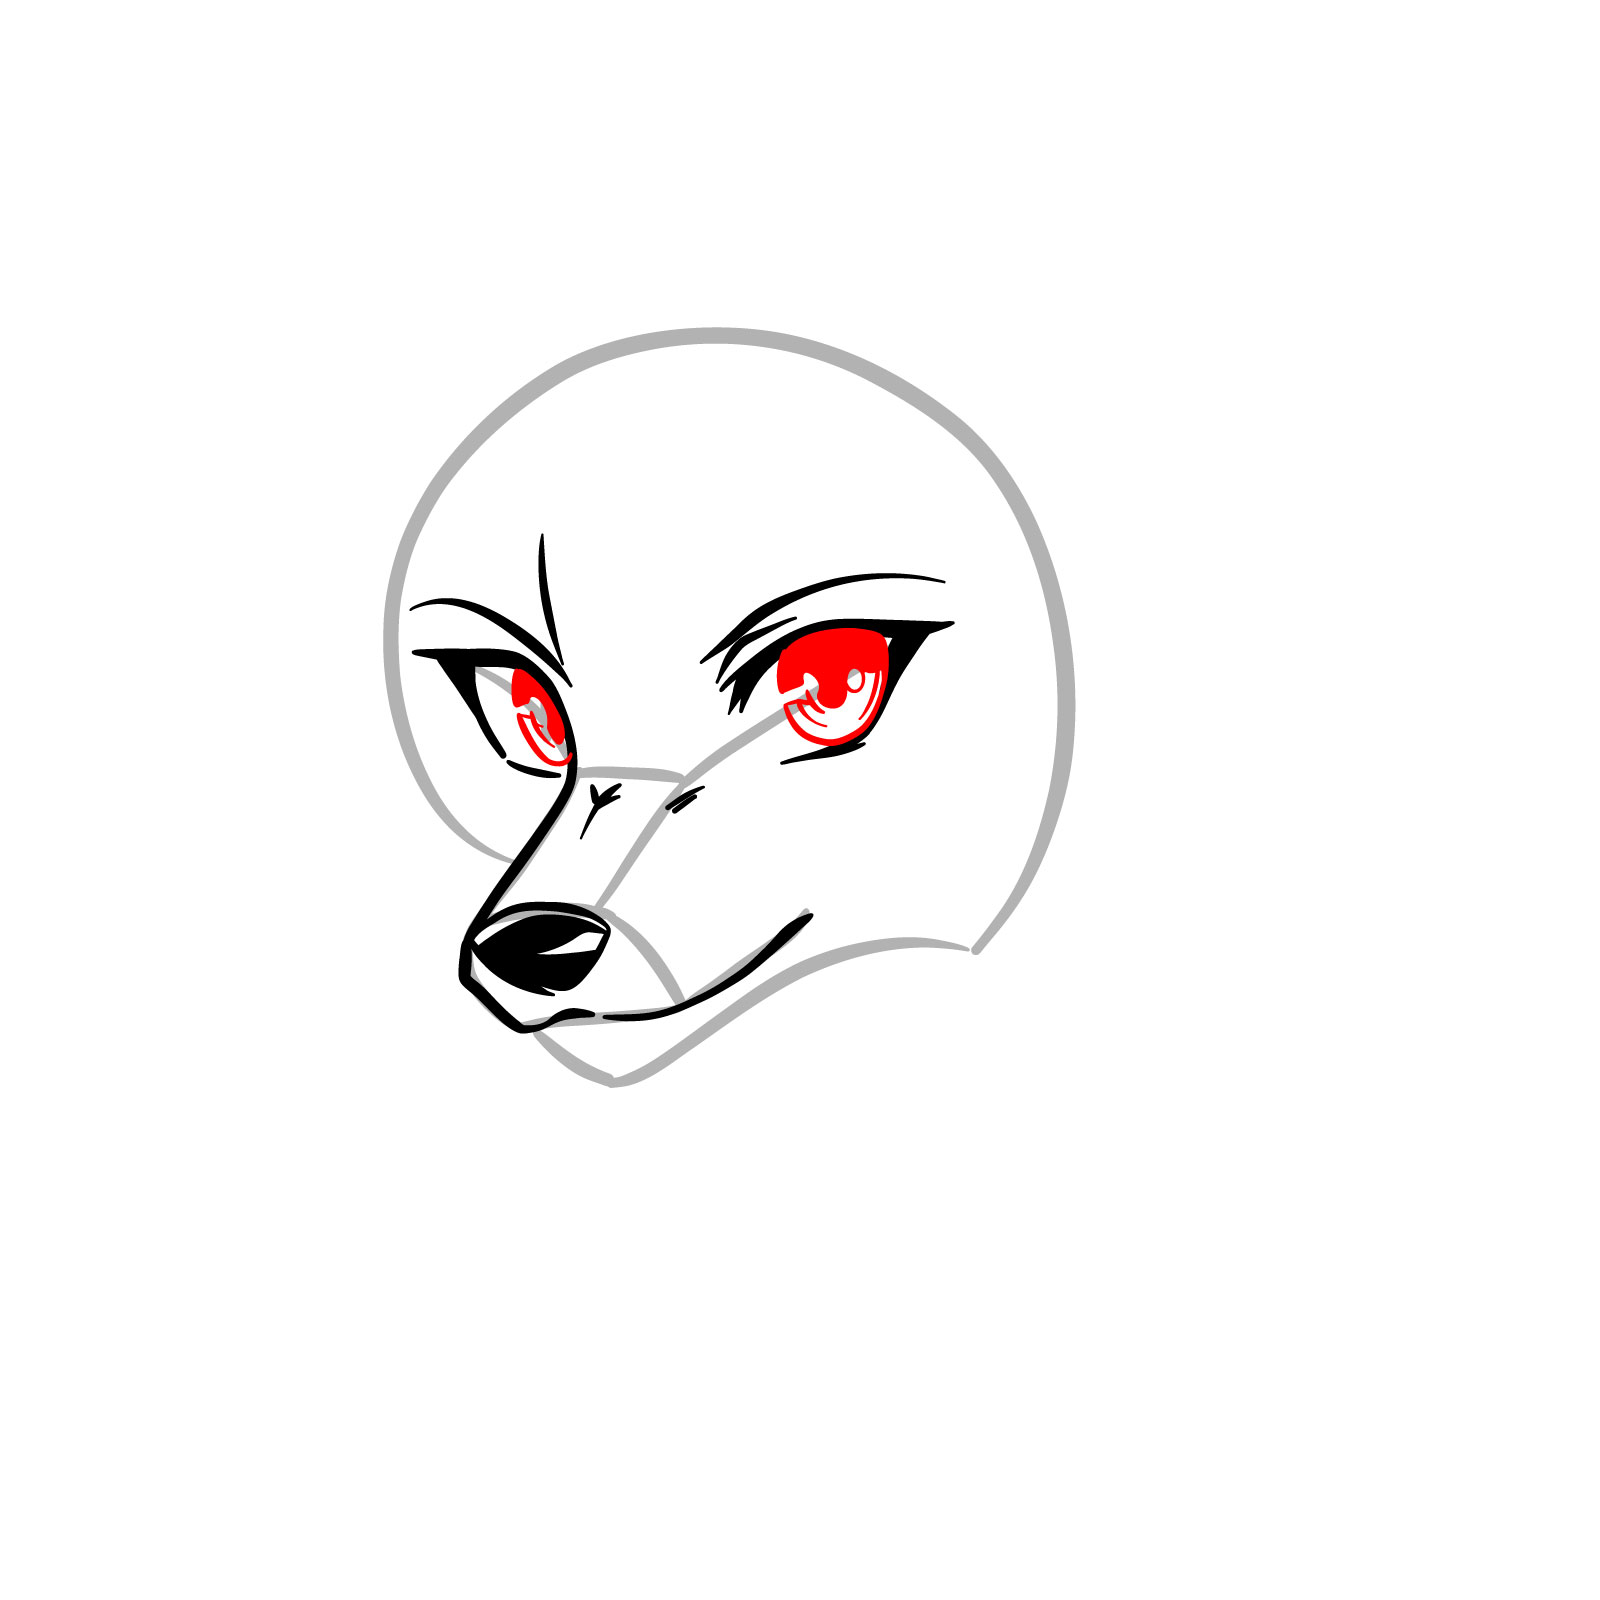 Anime wolf face drawing progression, step 5 focusing on the eyes - step 05